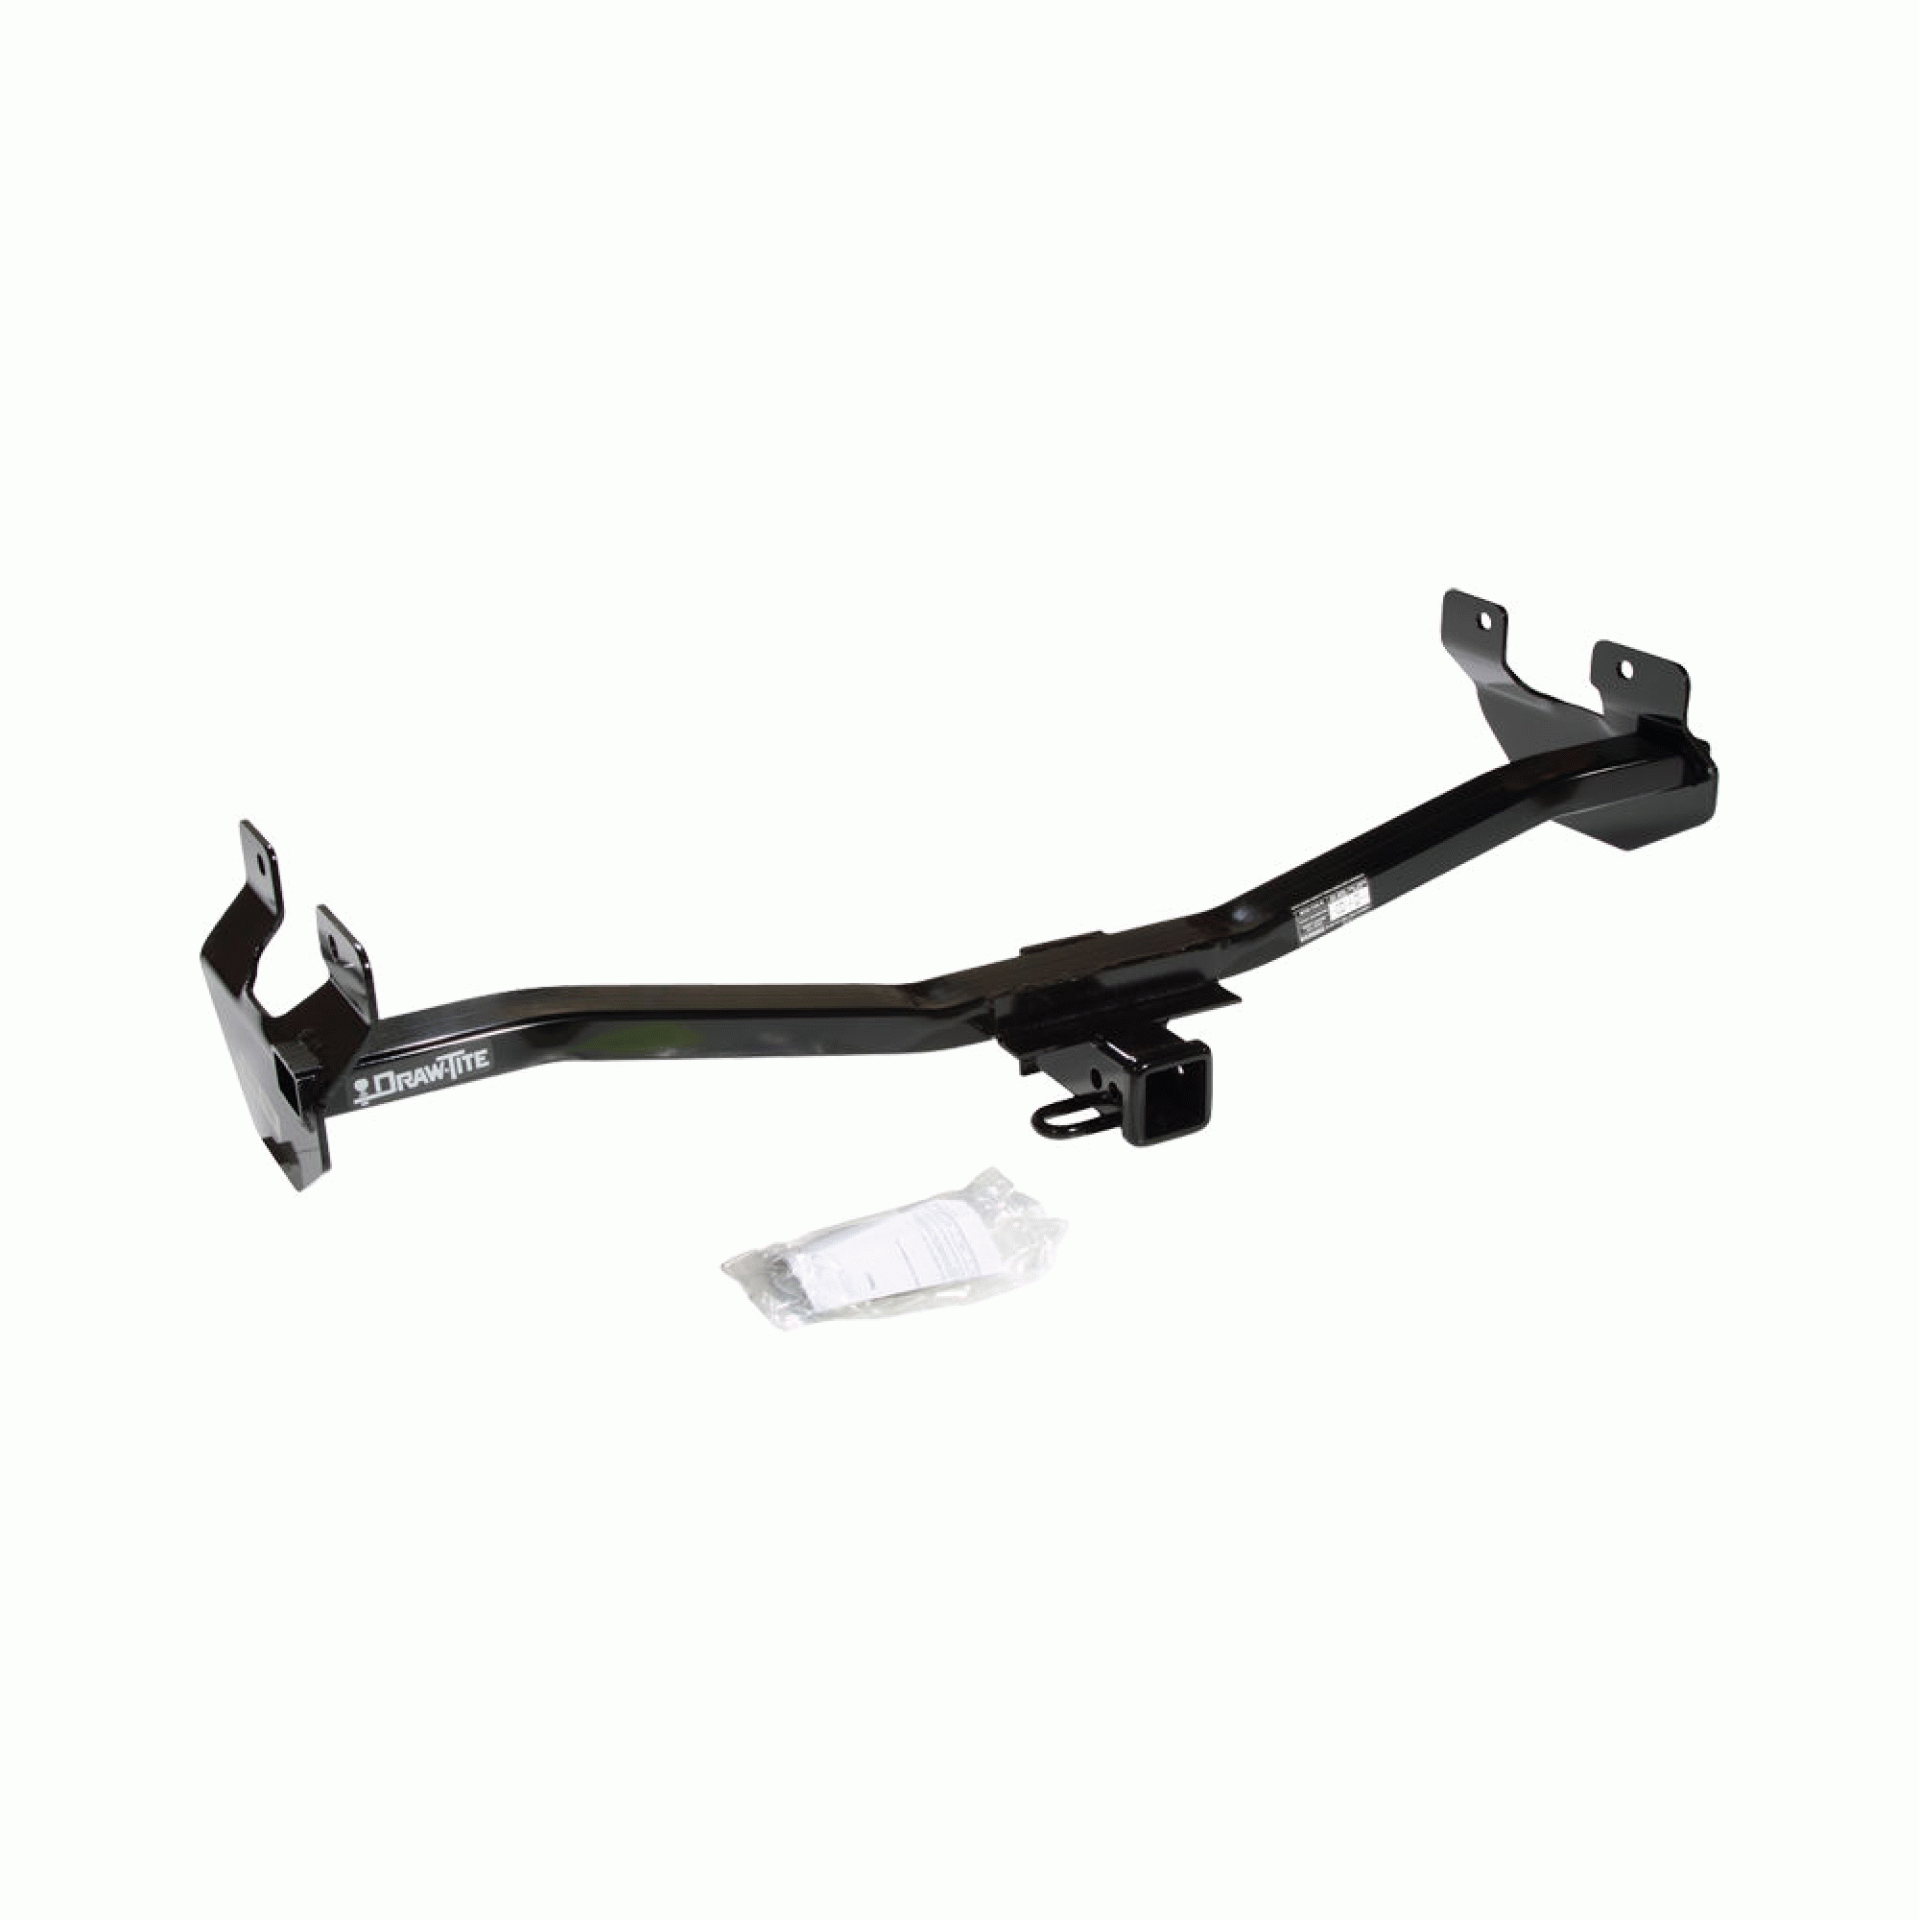 DRAW-TITE | 75382 | HITCH CLASS III REQUIRES 2 INCH REMOVABLE DRAWBAR